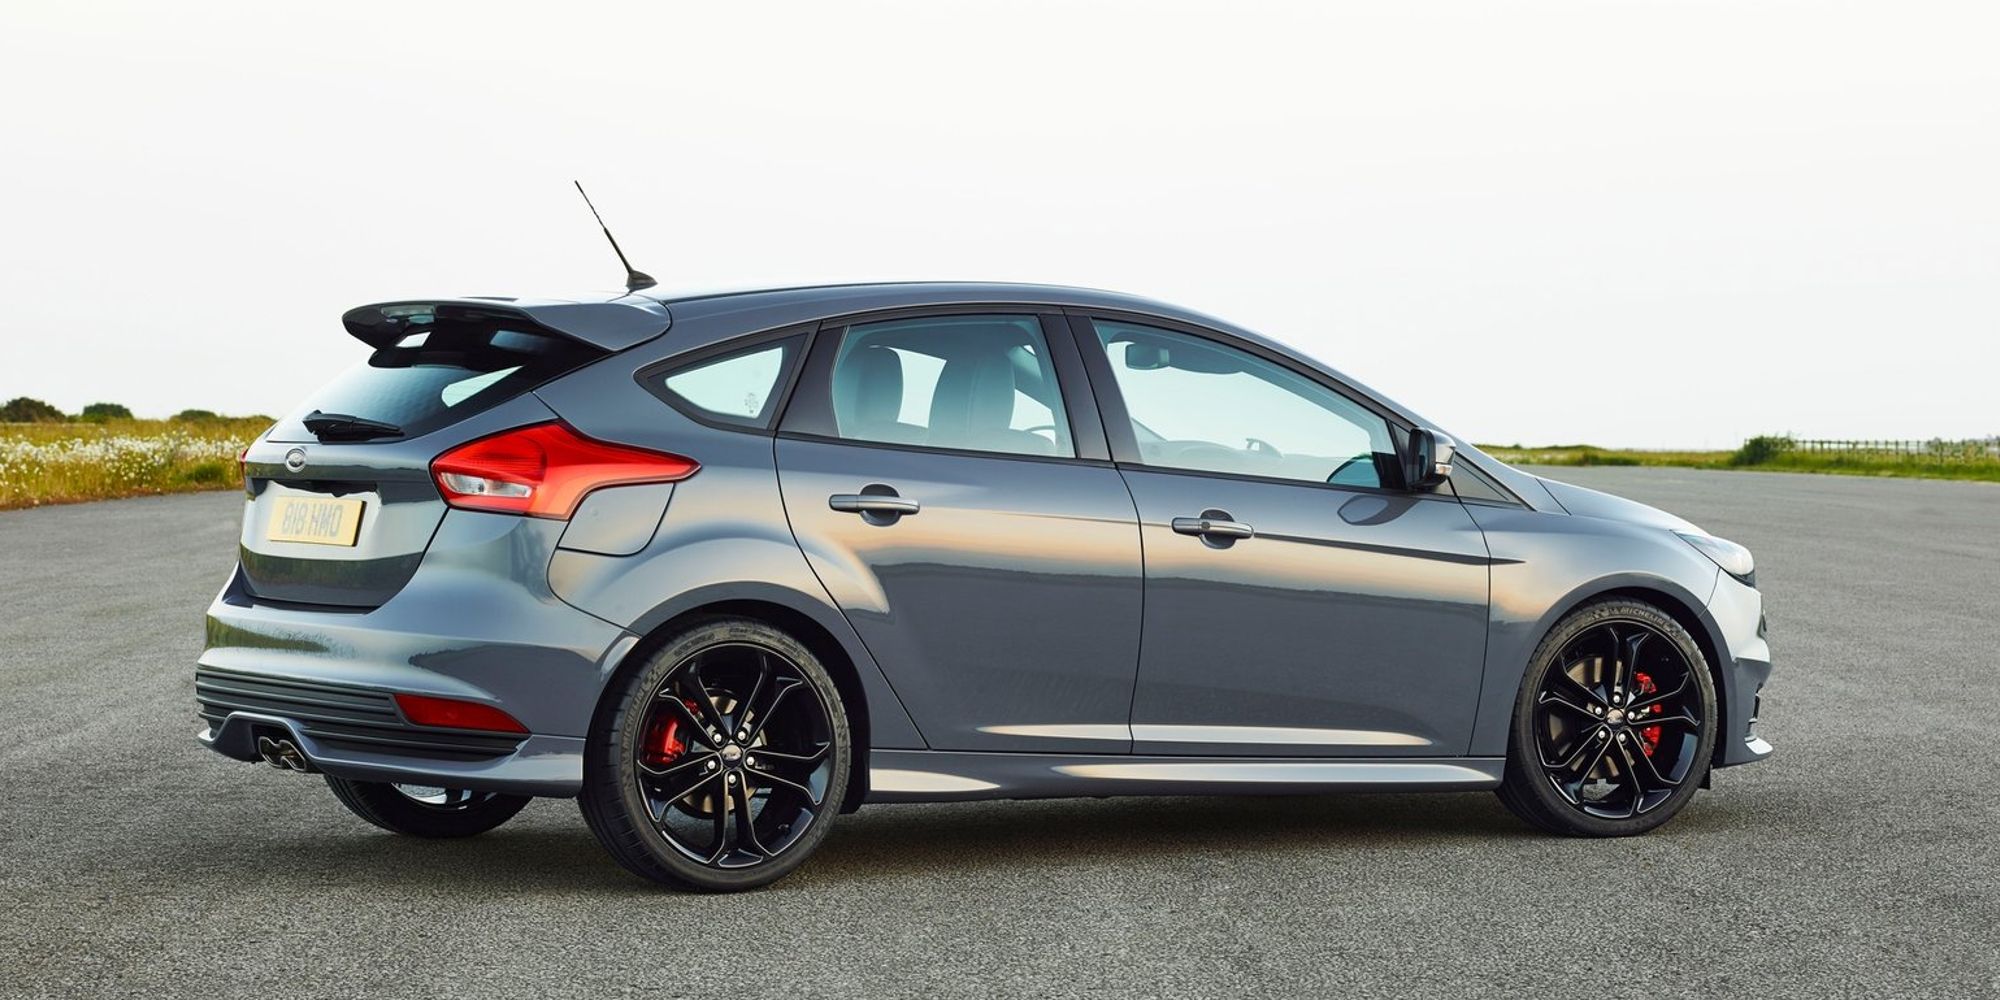 Rear 3/4 view of a gray Focus ST